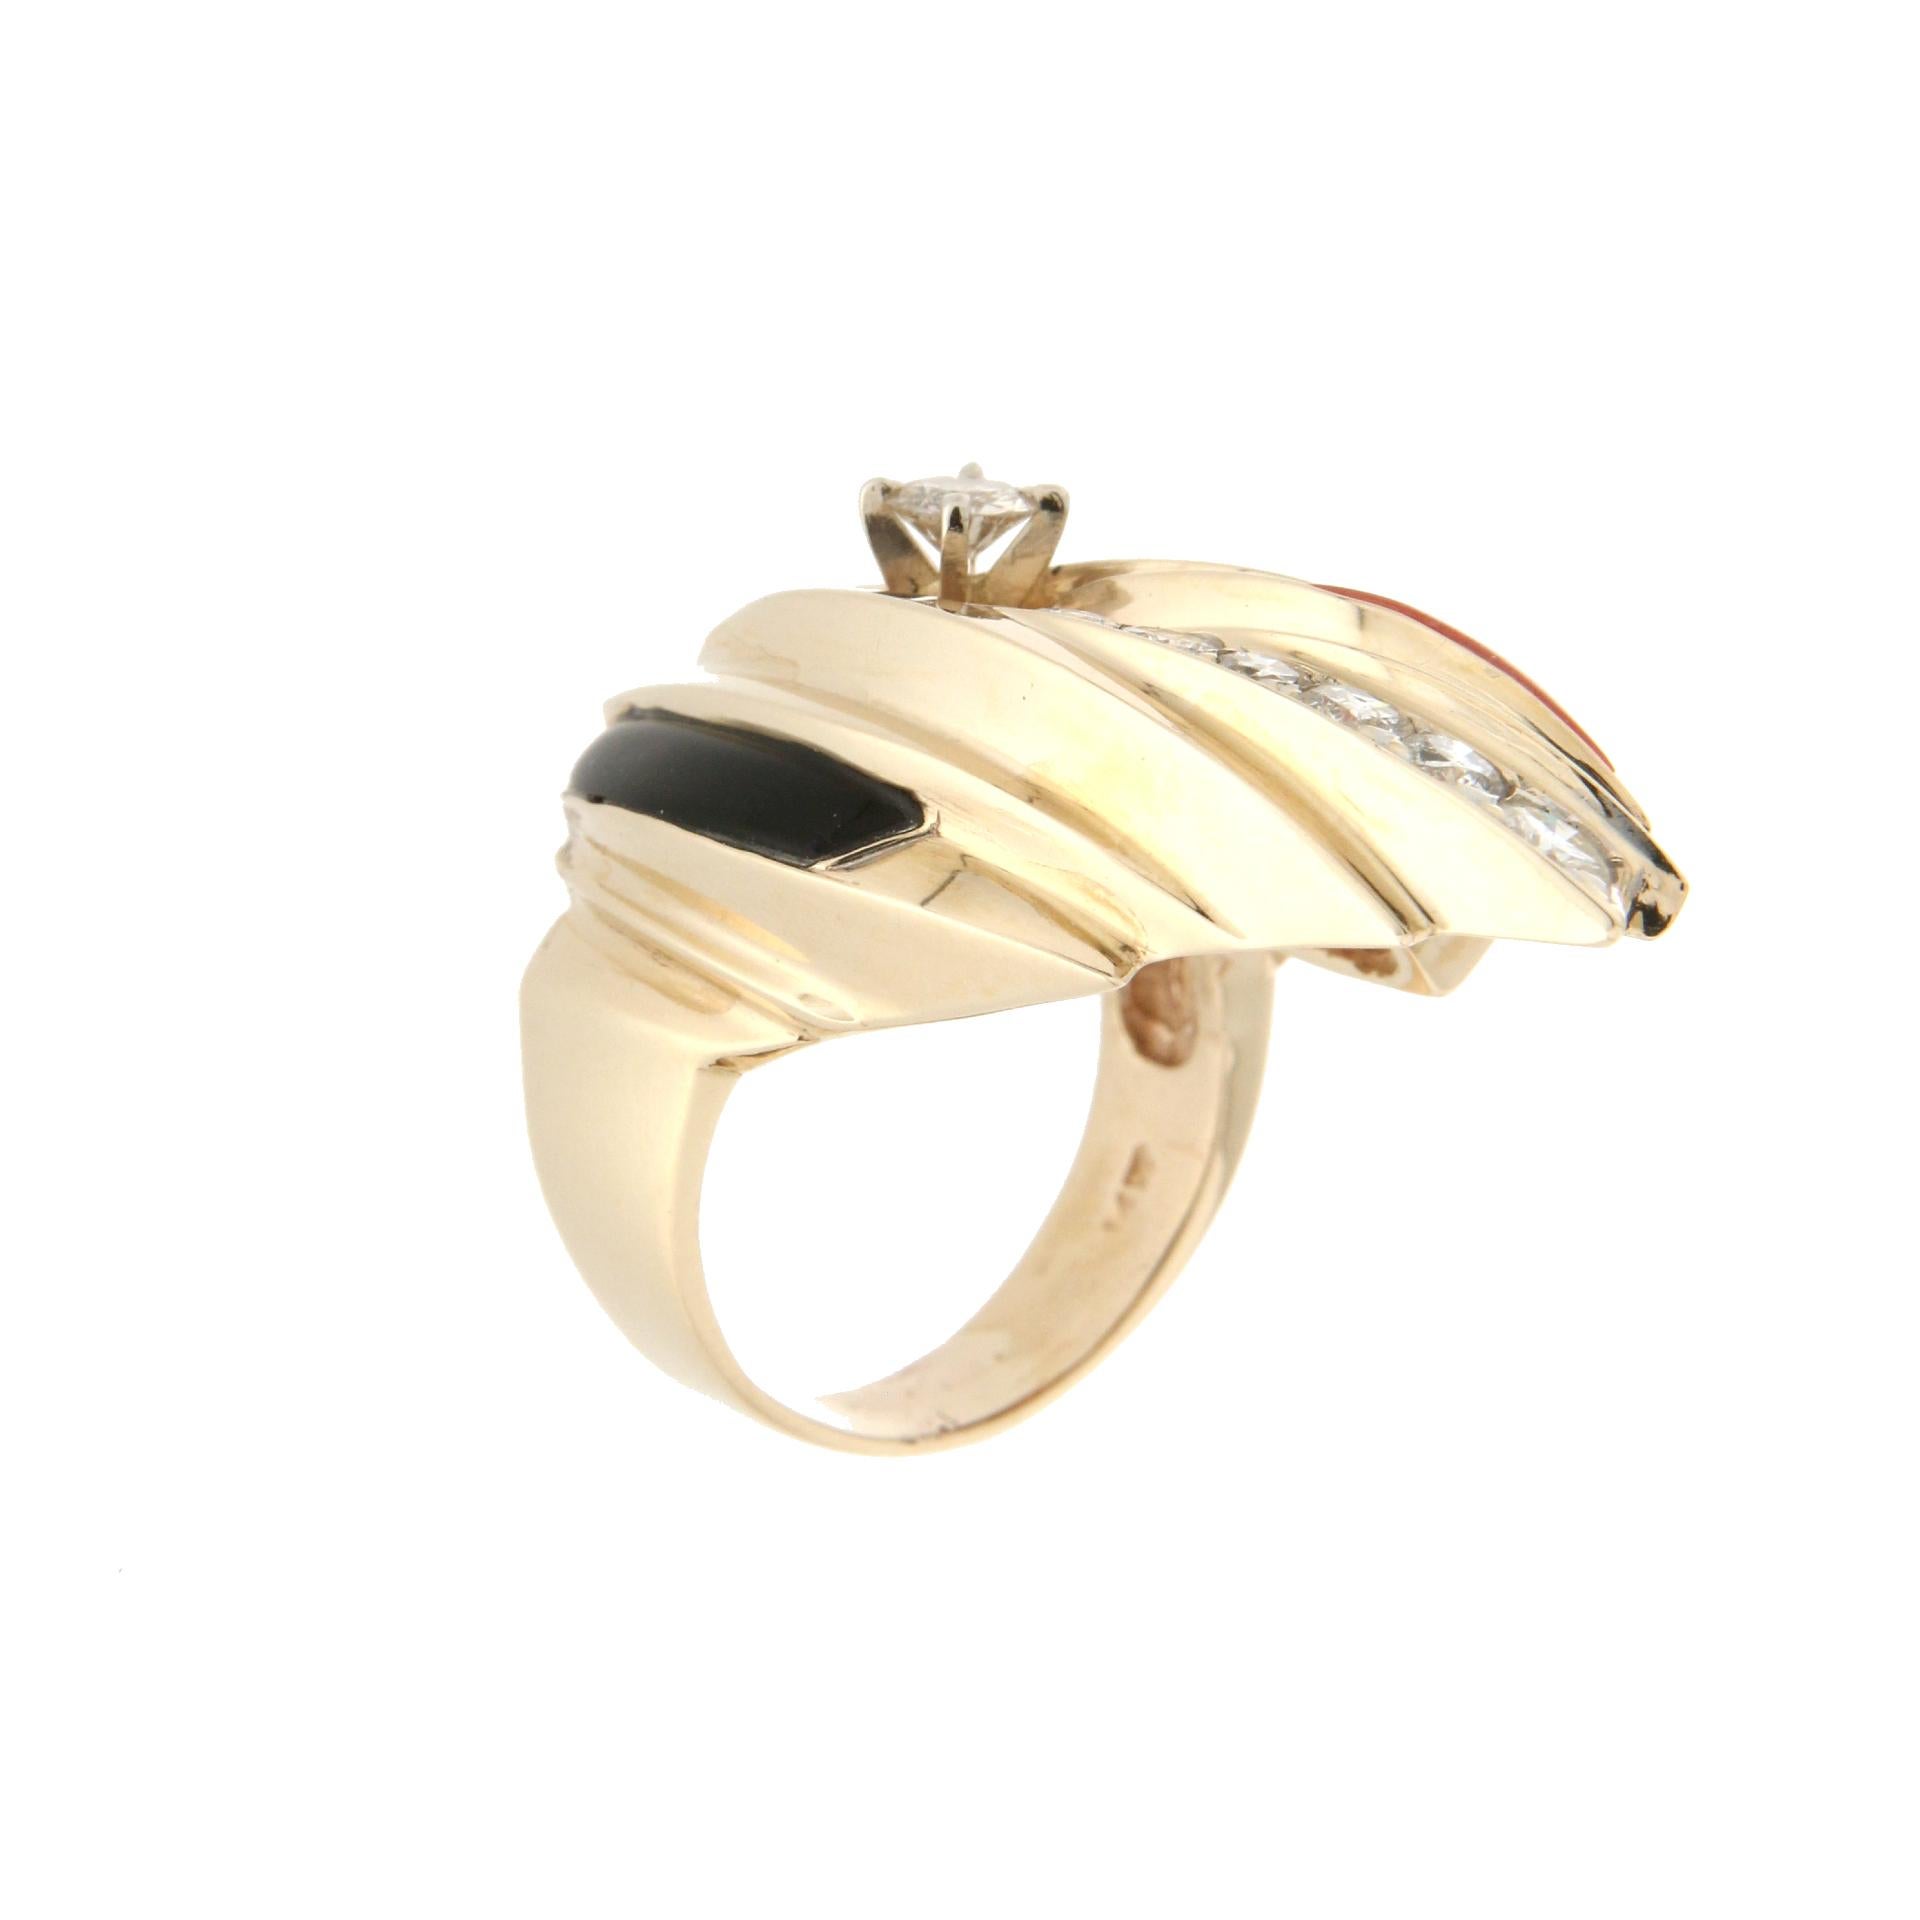 Handcraft Coral 14 Karat Yellow Gold Onyx Diamonds Cocktail Ring For Sale 2